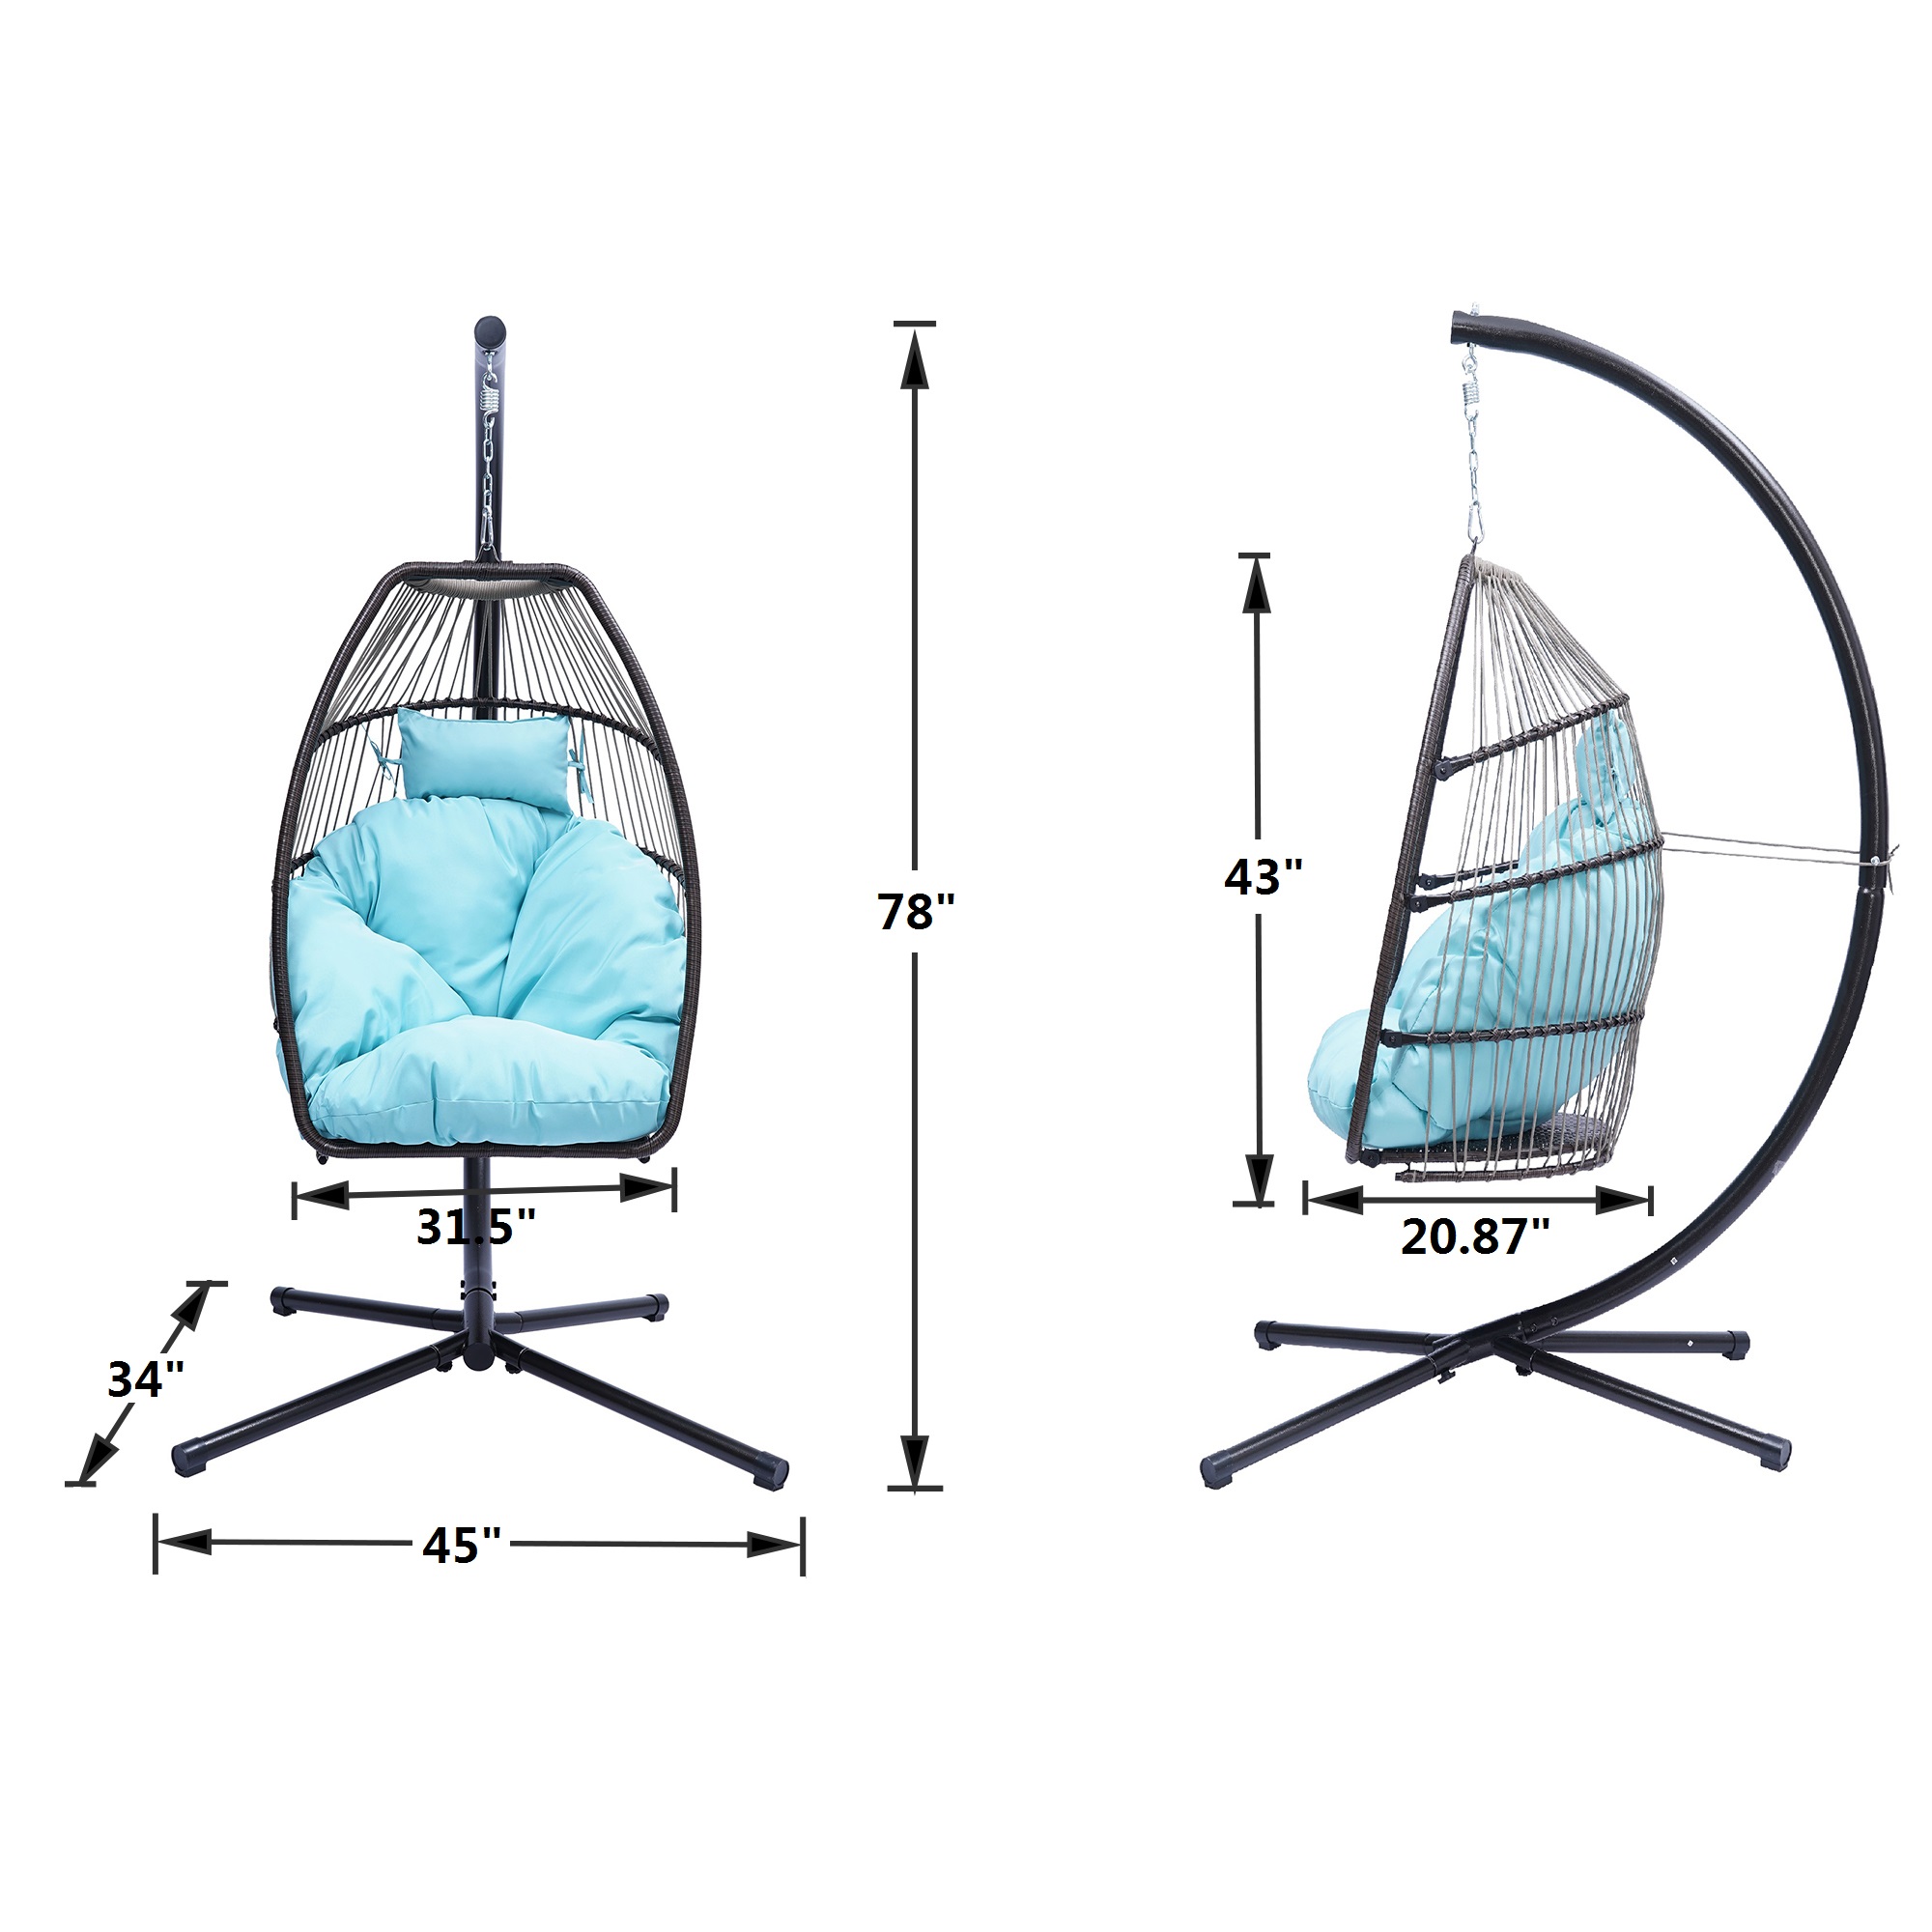 UHOMEPRO Wicker Hanging Egg Chair, Outdoor Patio Furniture with Light Gray Cushion, Hanging Egg Chair with Stand, Swinging Egg Chair, Outdoor Chair for Beach, Backyard, Pool, Balcony, Lawn, W11051 - image 4 of 6